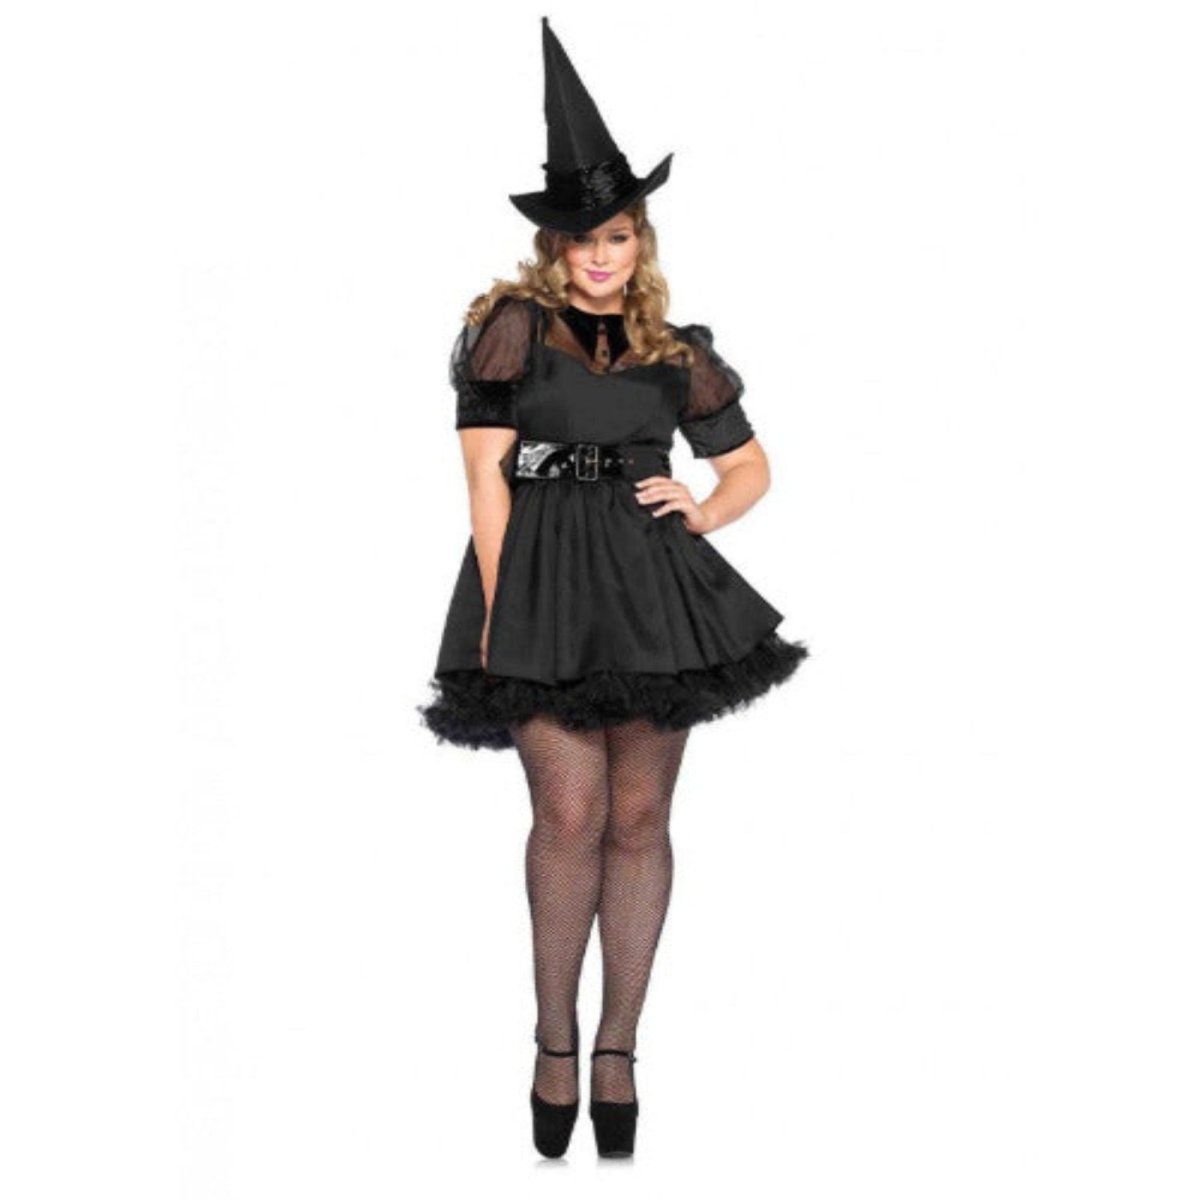 Bewitching Witch Costume - worldclasscostumes